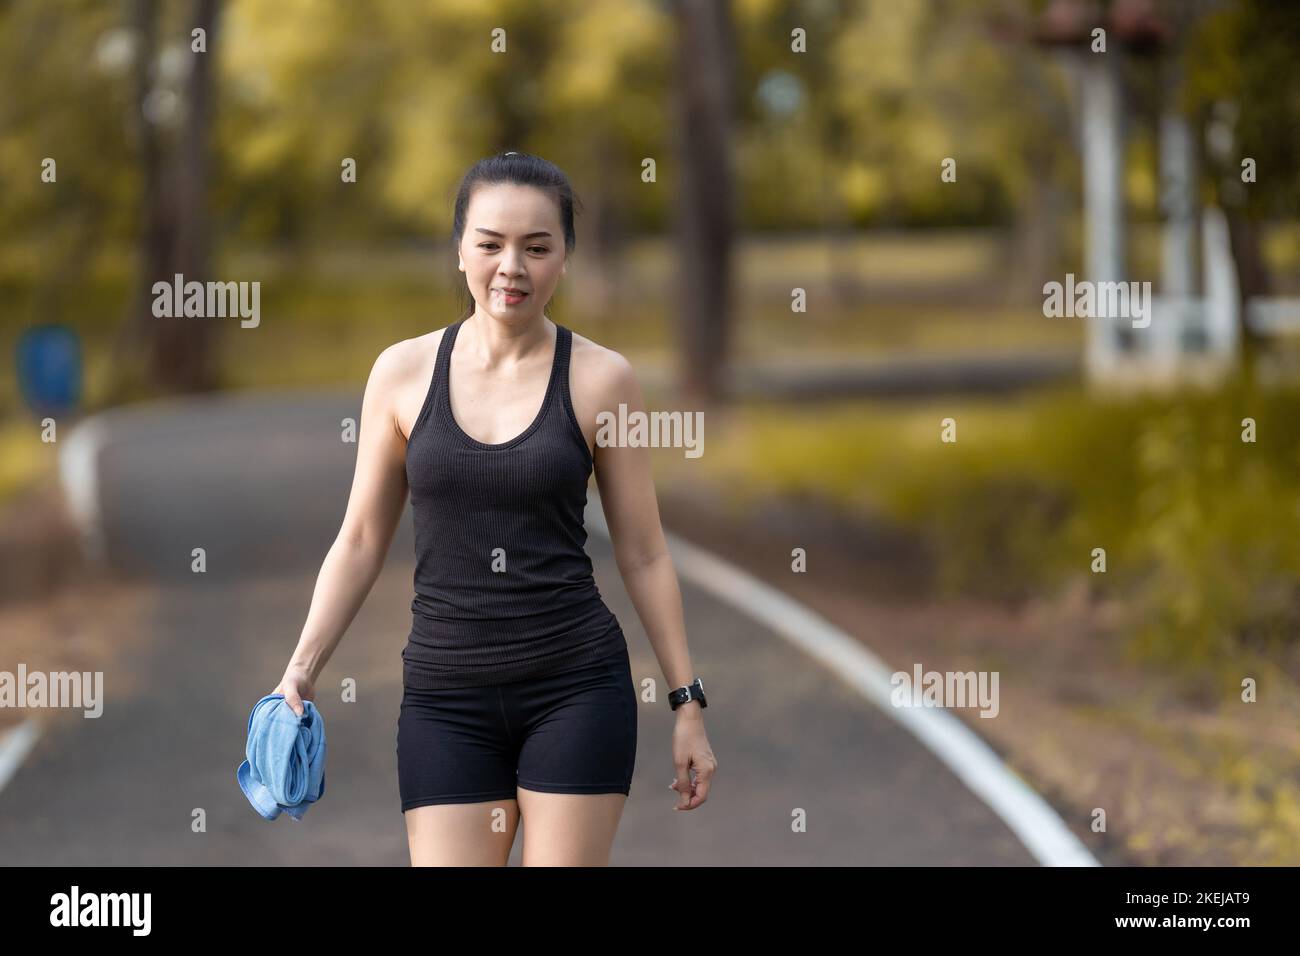 An Asian female in a sports suit jogging on the street, holding a towel in one hand Stock Photo